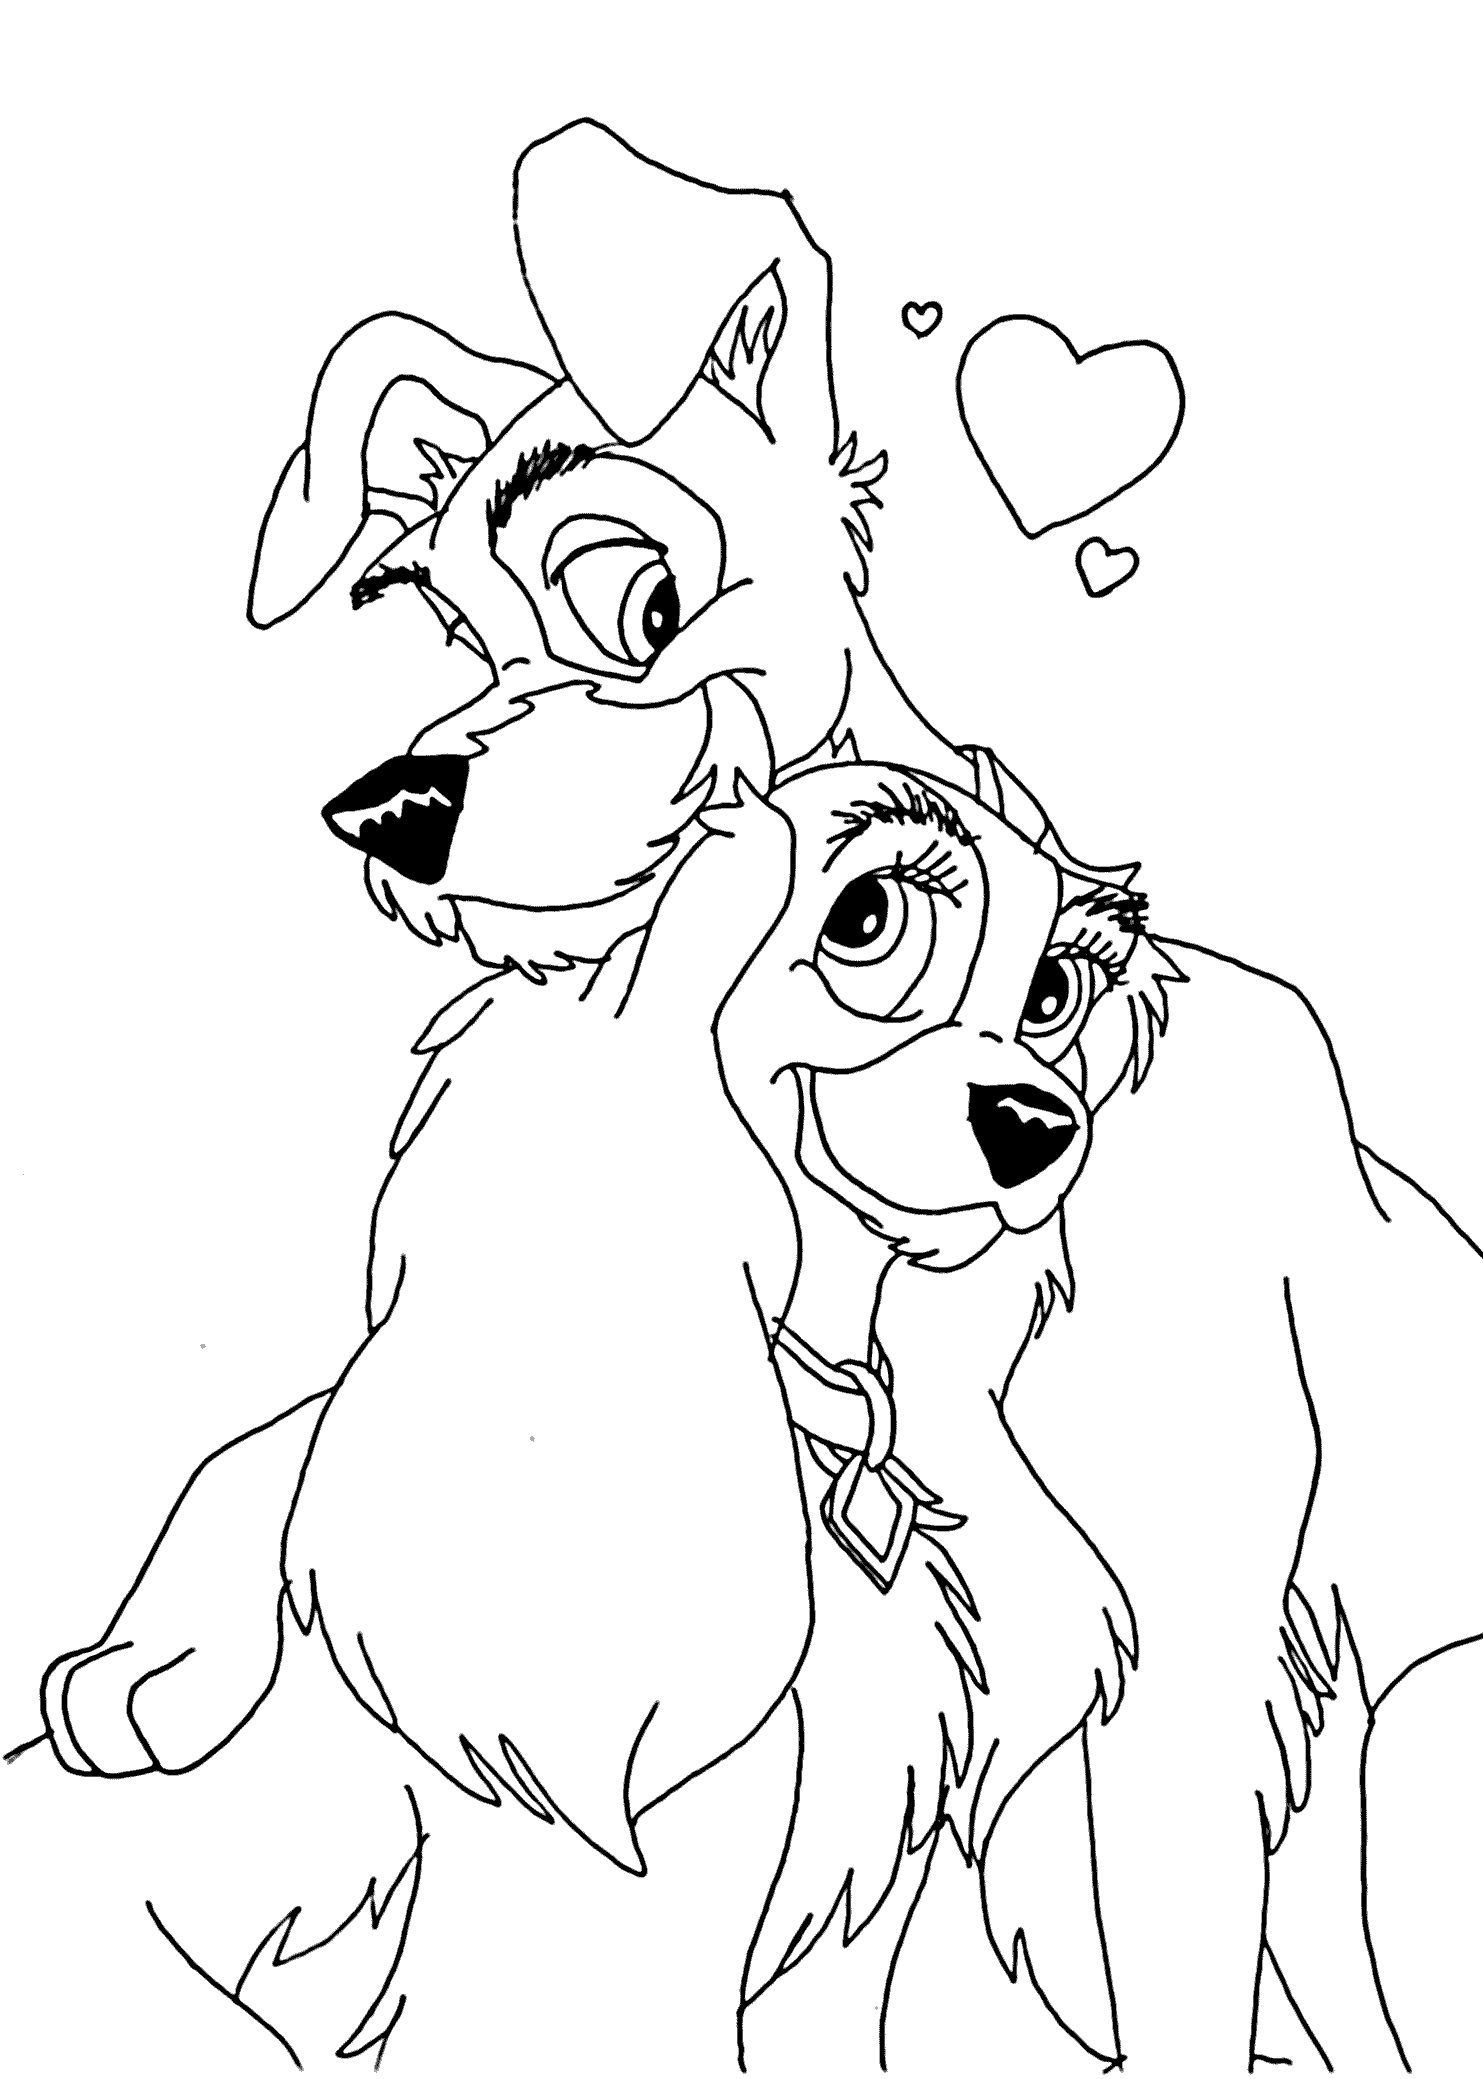 Lady and the Tramp Coloring Pages Cartoons Lady and the Tramp In Love Printable 2020 3599 Coloring4free